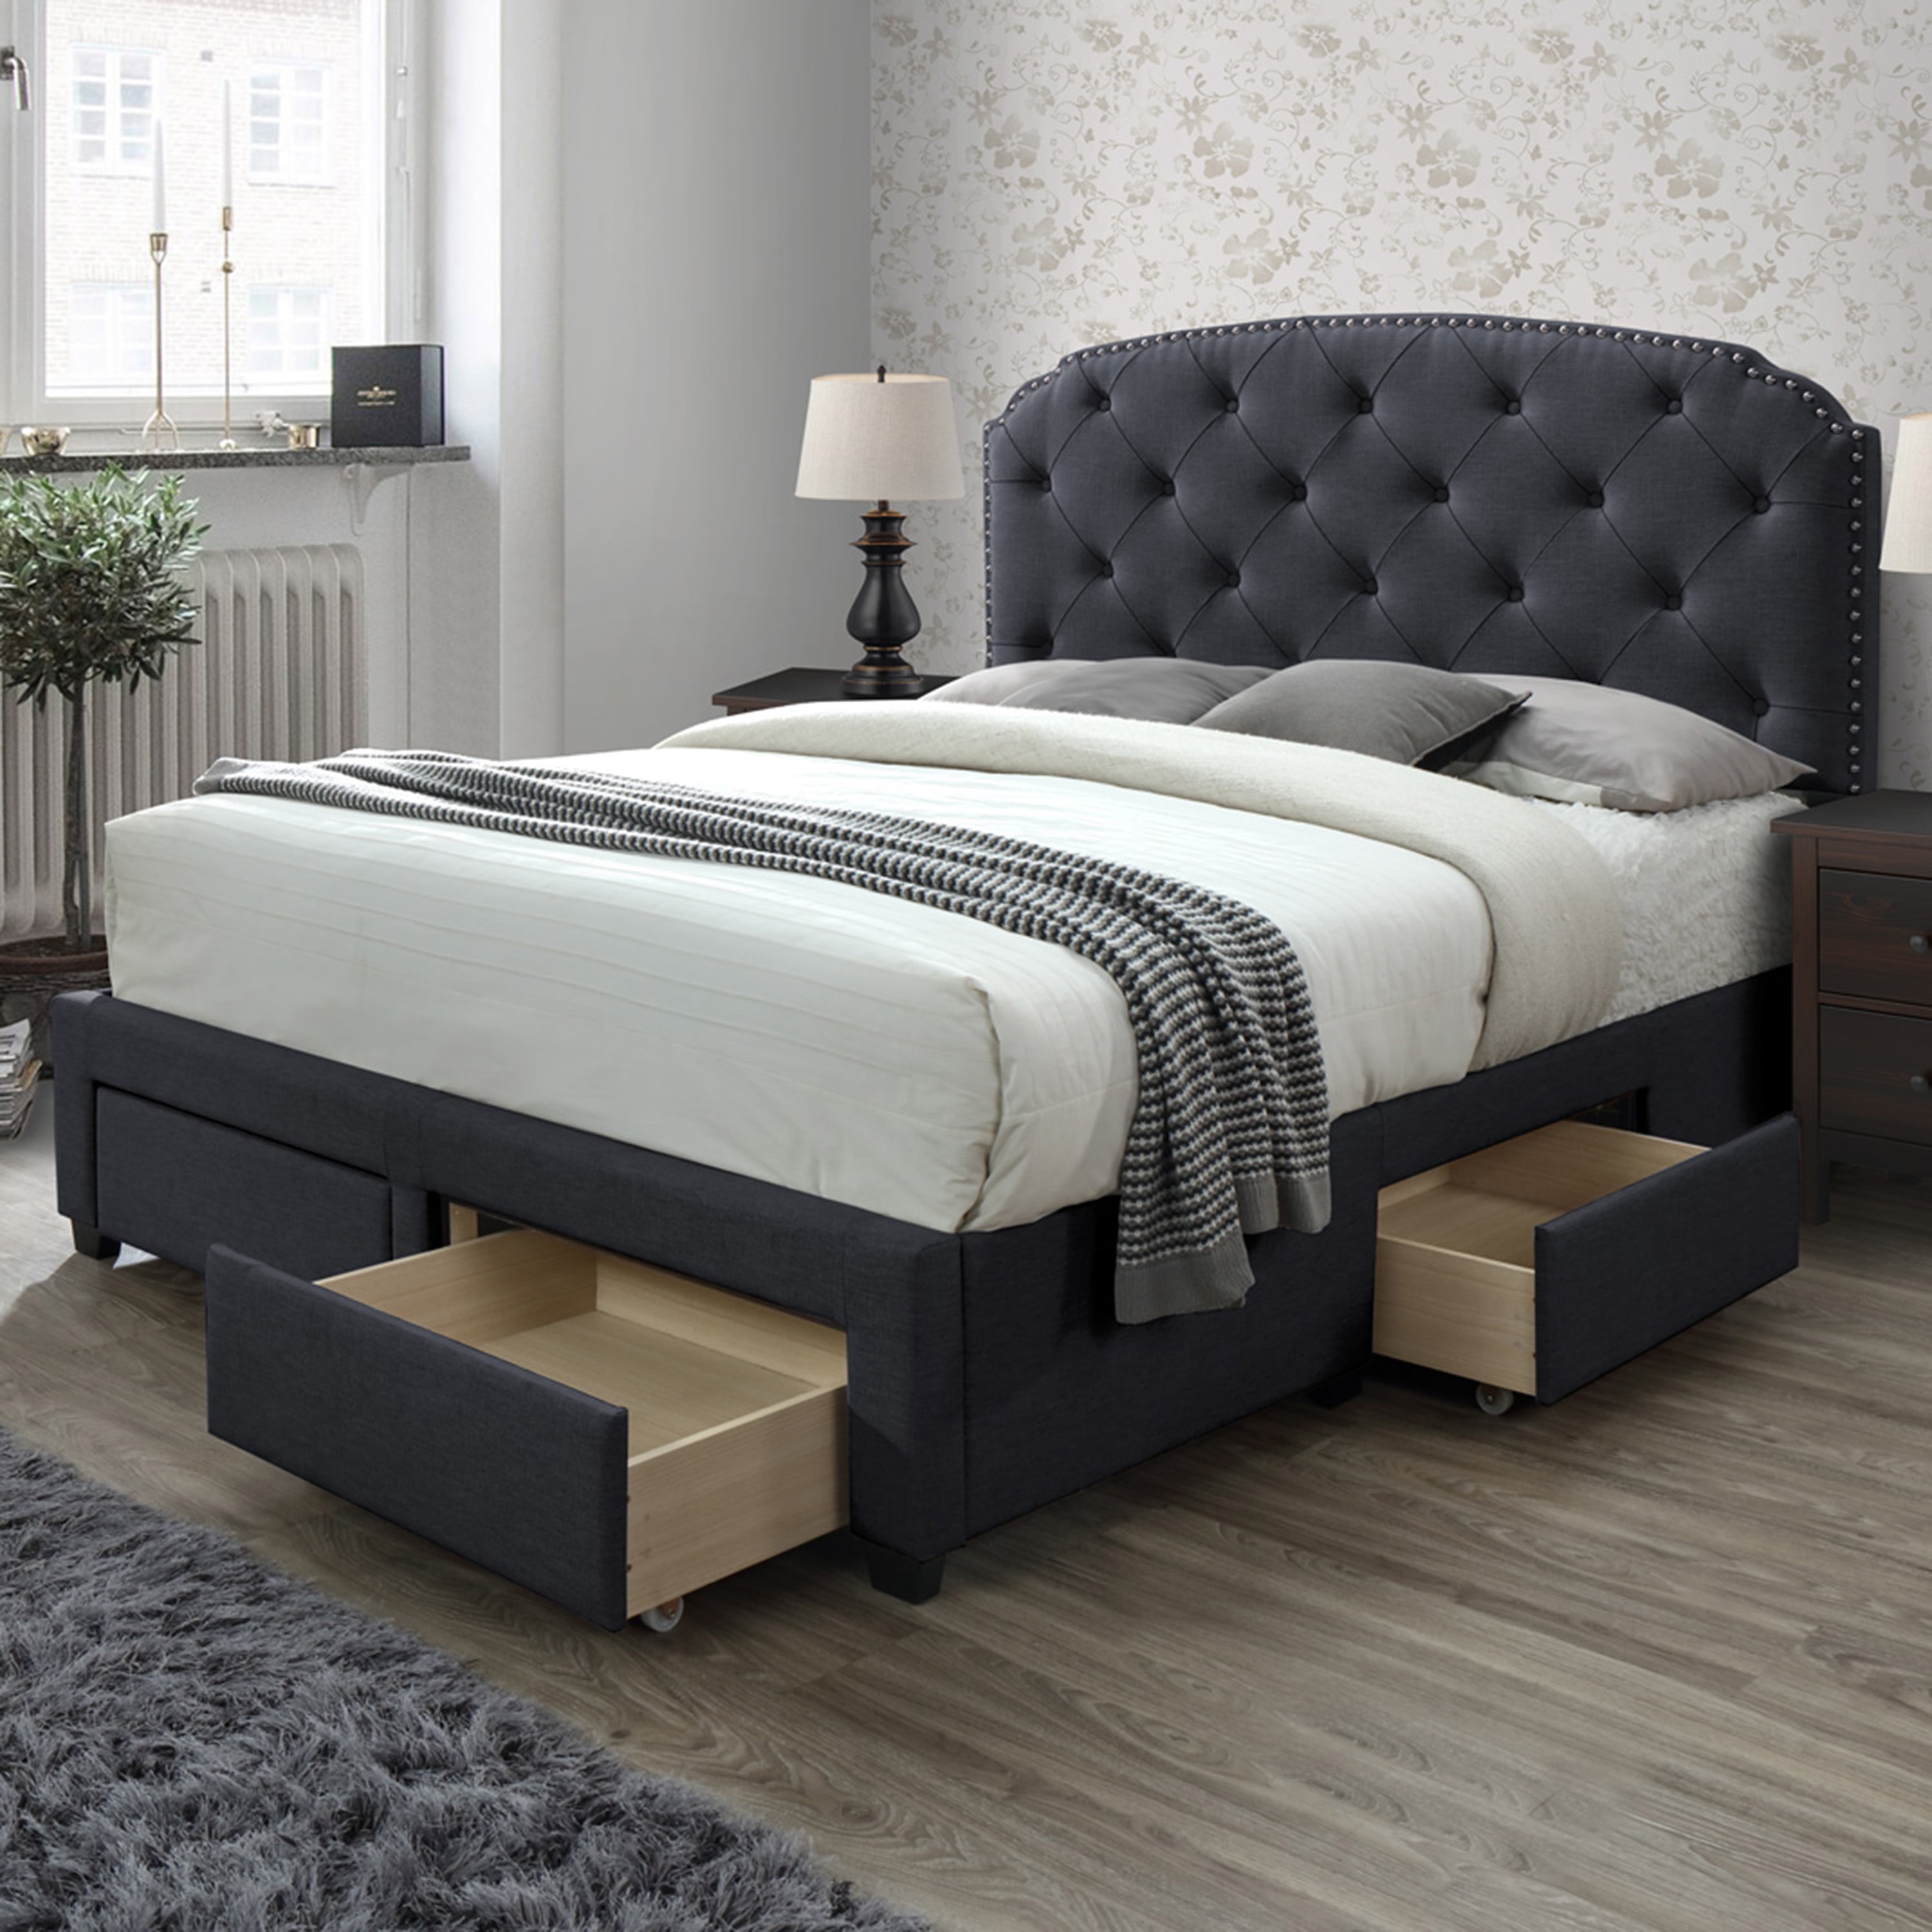 Dg Casa Argo Tufted Upholstered Panel, Bed Base With Drawers King